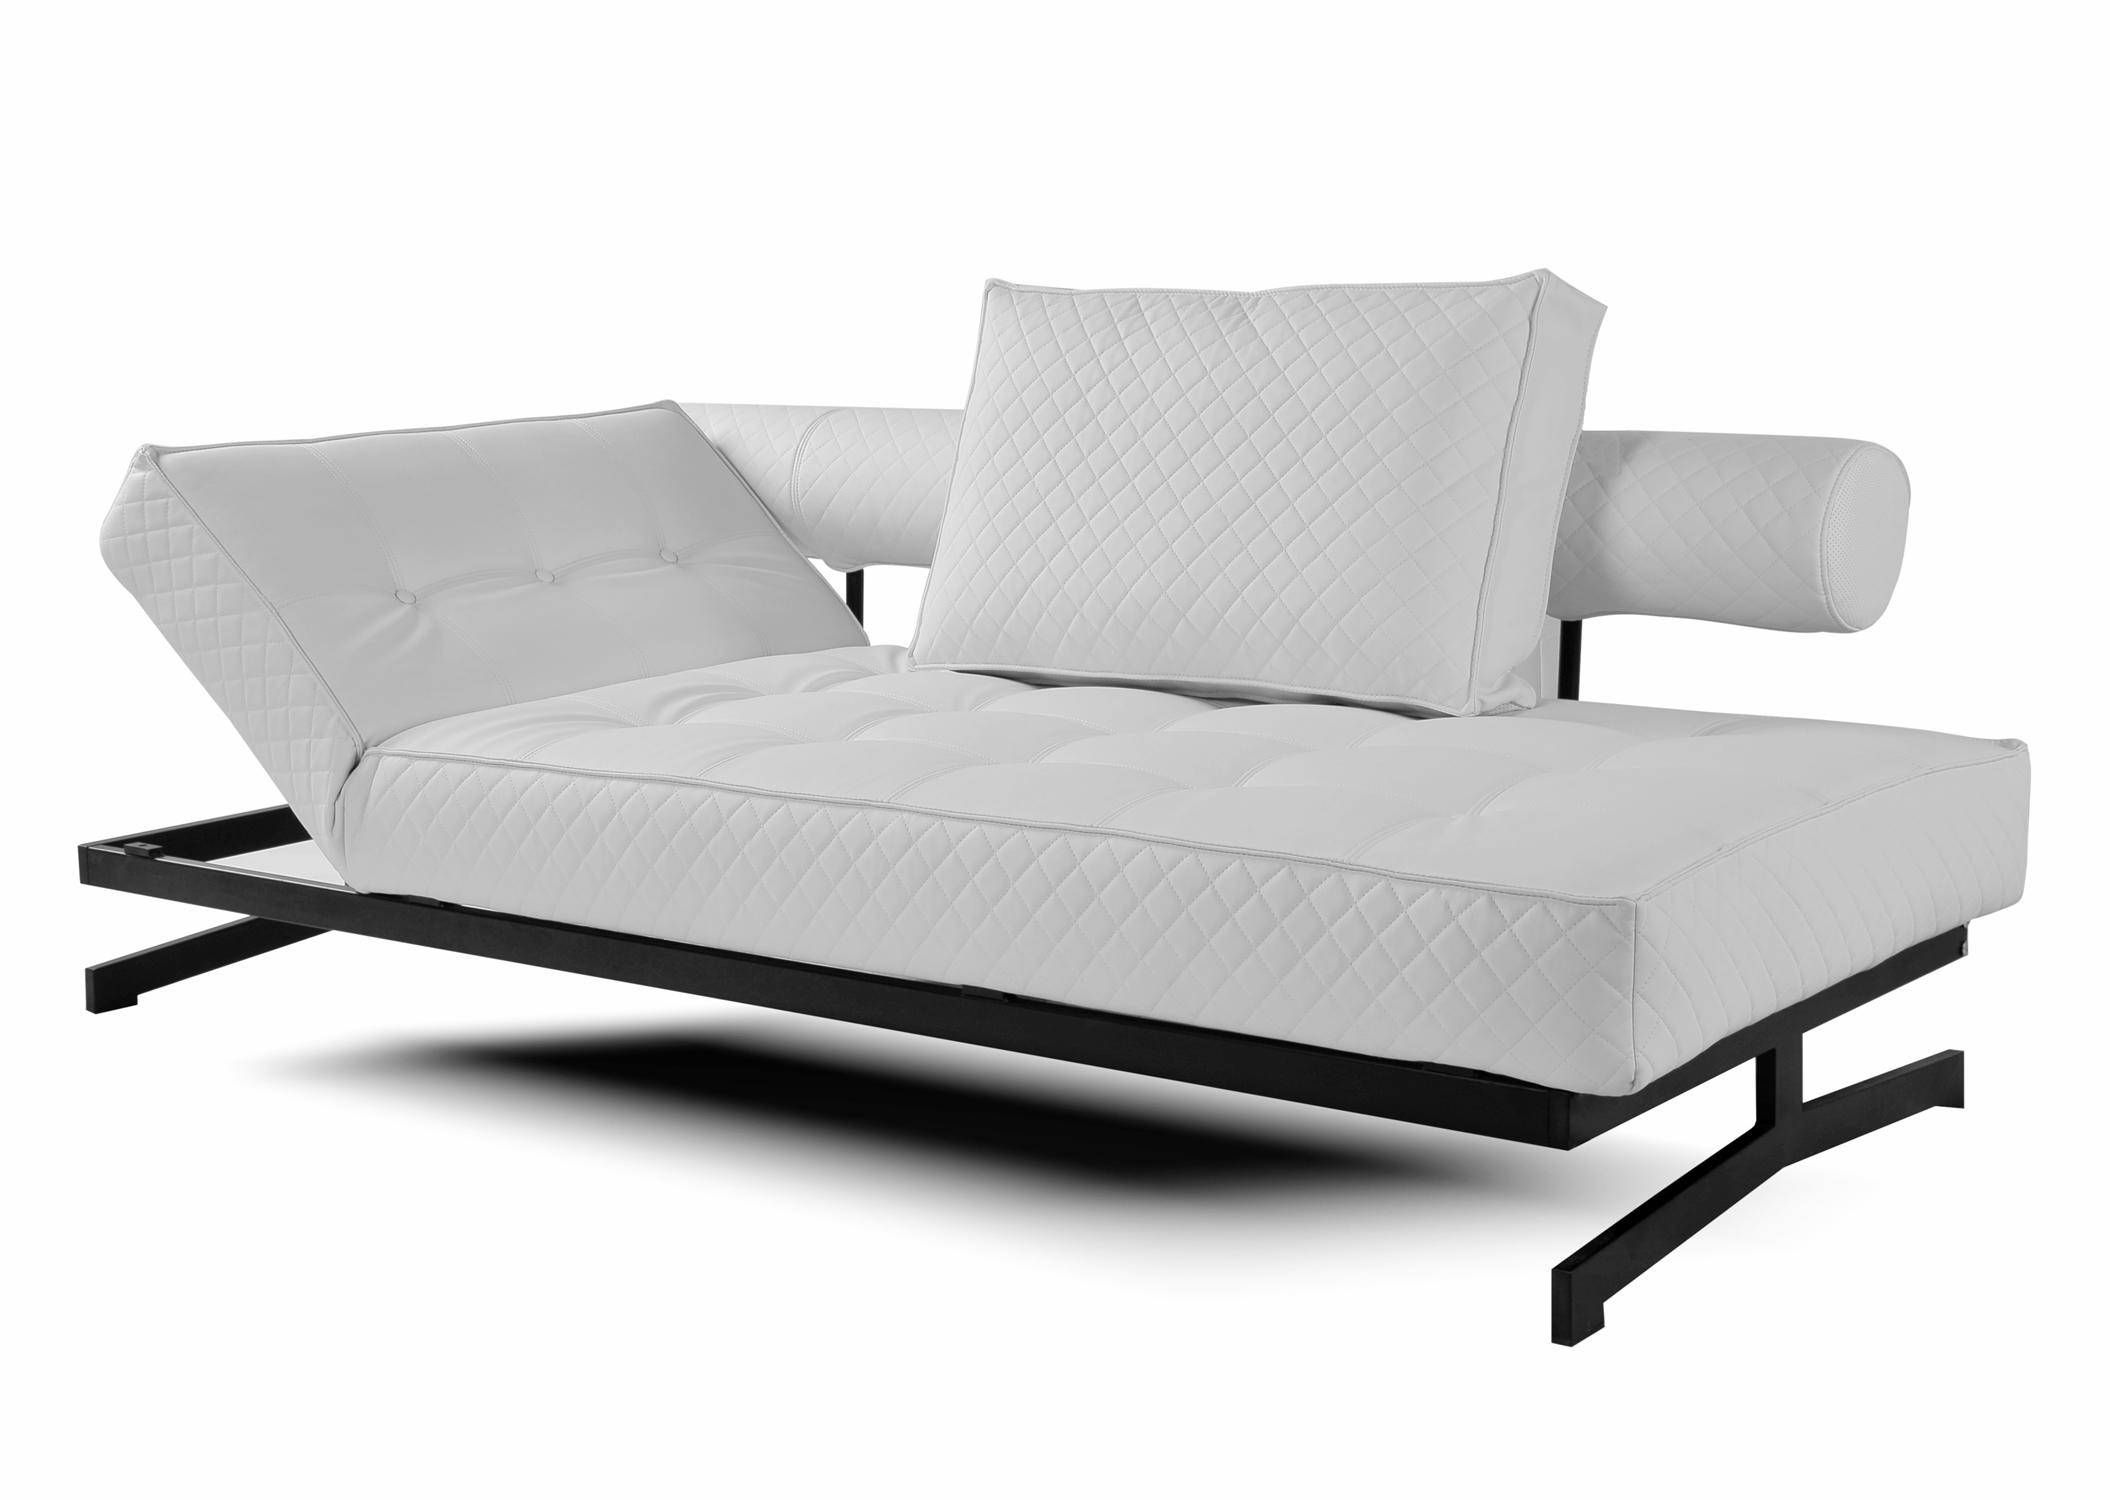 best choice lounger sofa bed